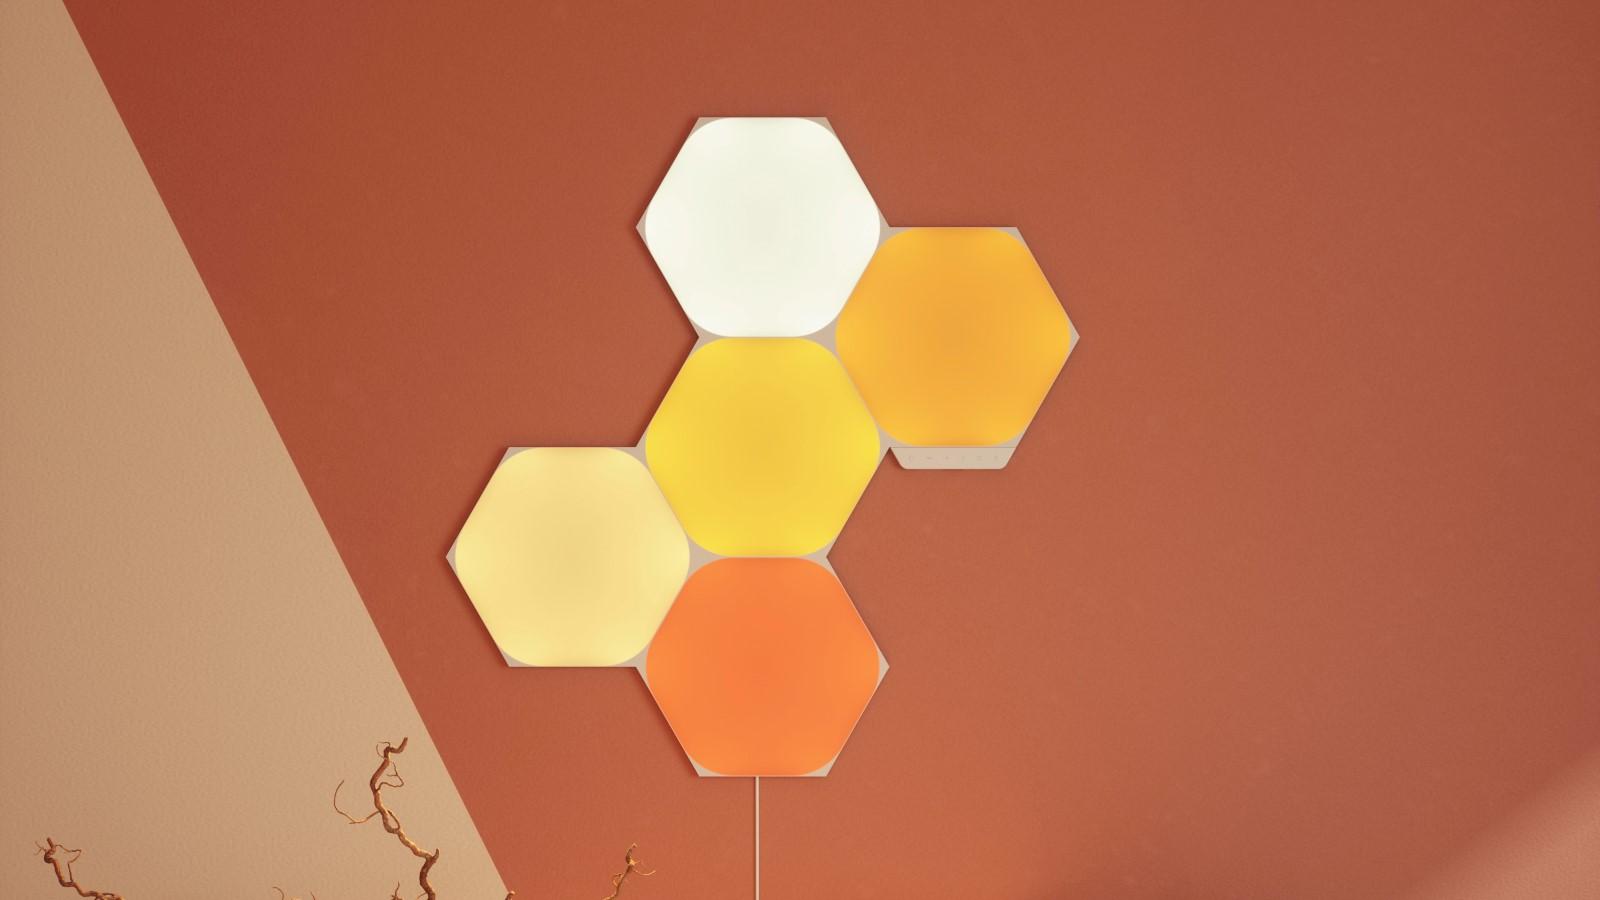 Nanoleaf Shapes - Choose from hexagons or triangles